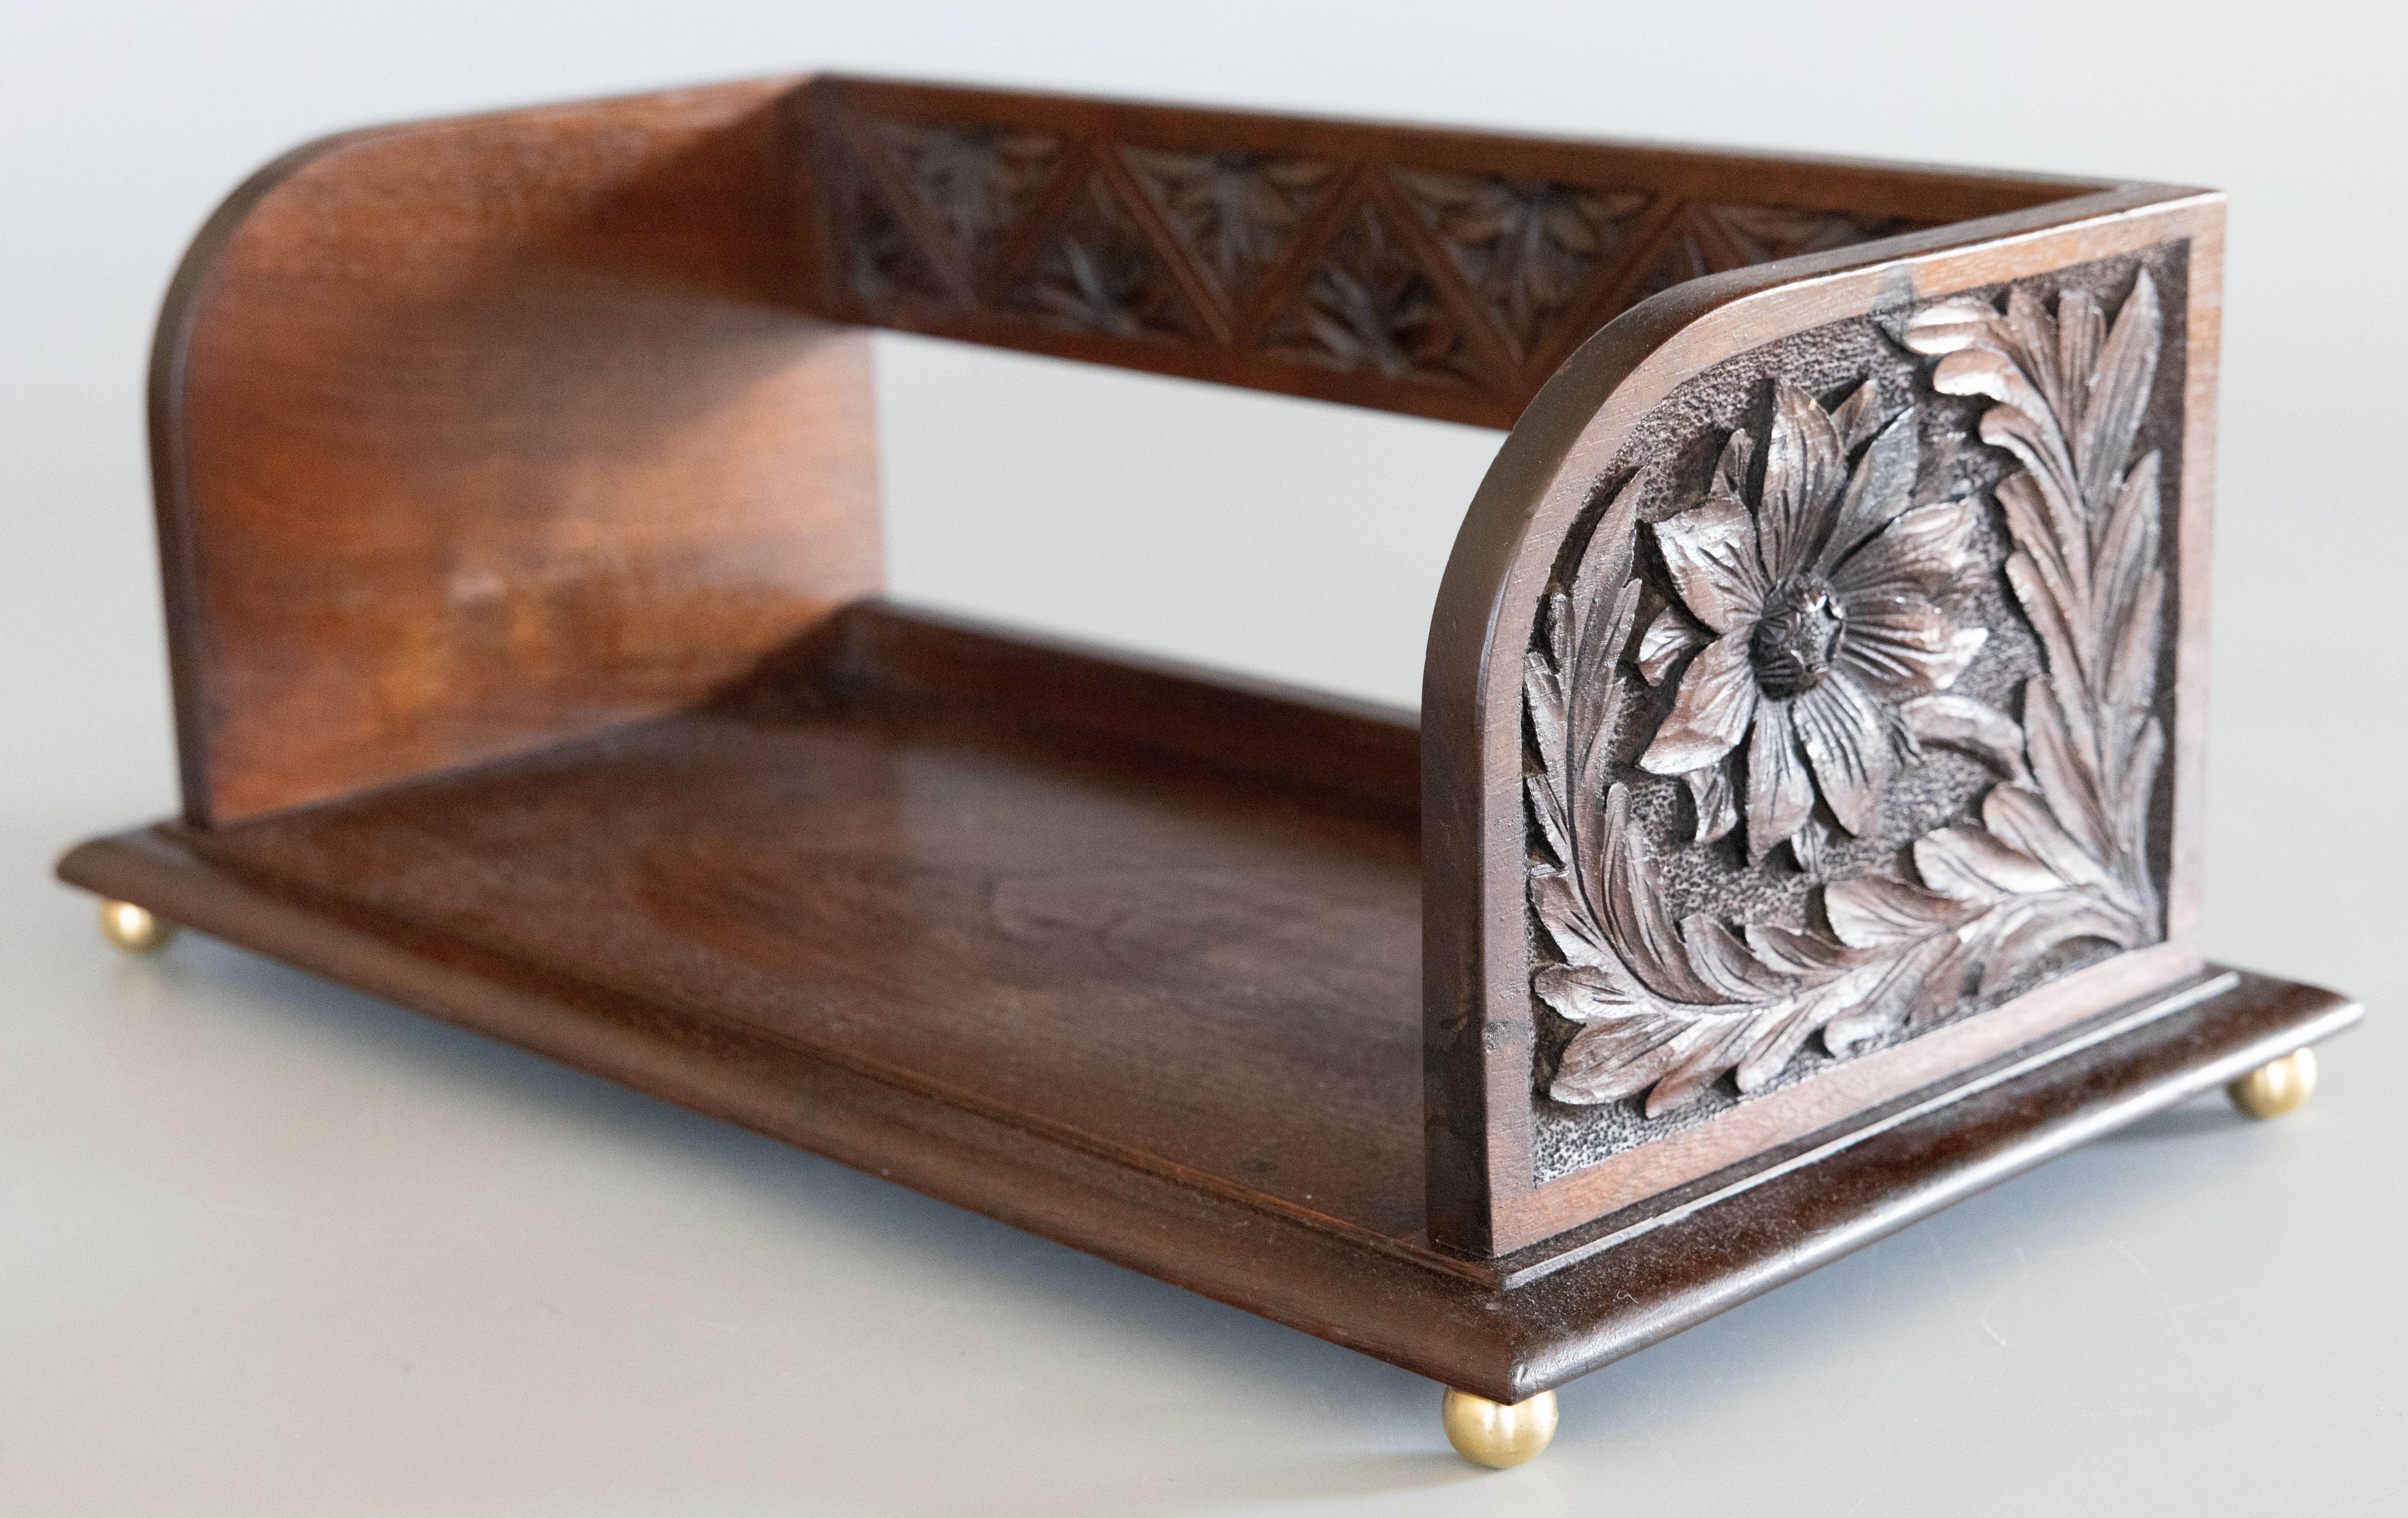 Oak English Carved Mahogany Table Top Book Trough Rack Stand Bookends, C. 1900 For Sale